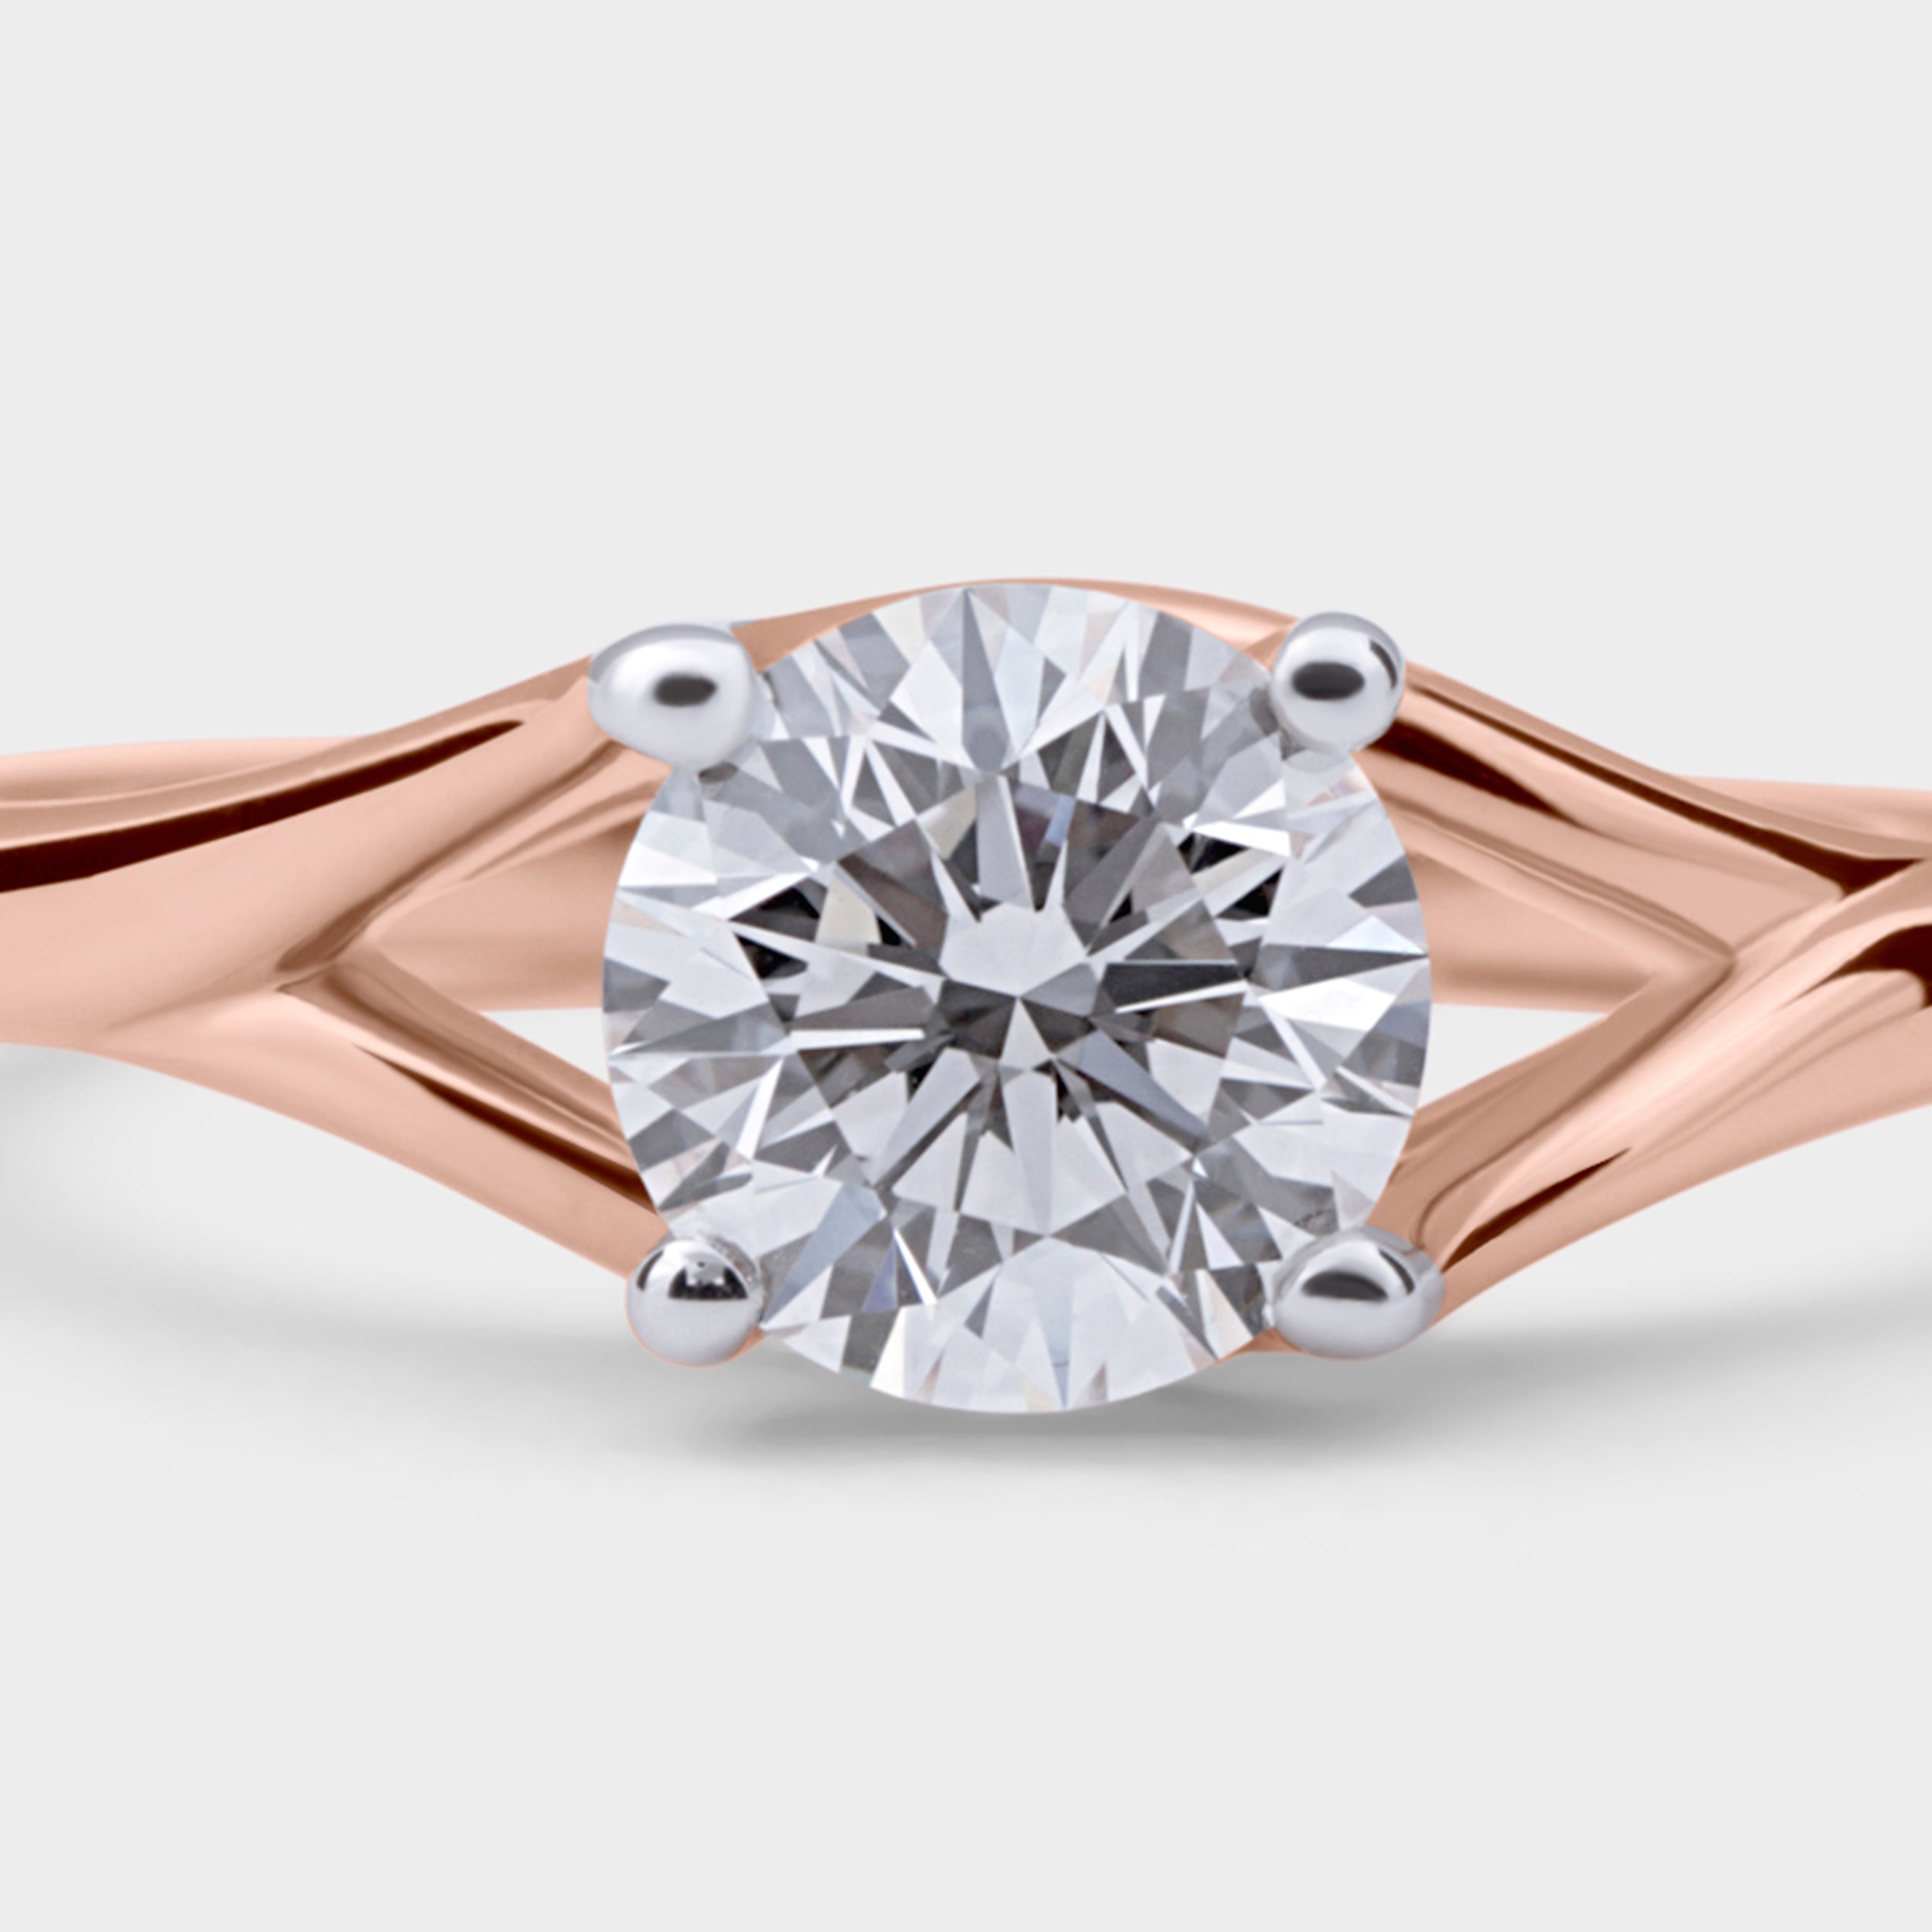 Round Brilliant 1.02 Carat Solitaire Lab-Grown Diamond Ring in Rose Gold | SKU : 0019828770